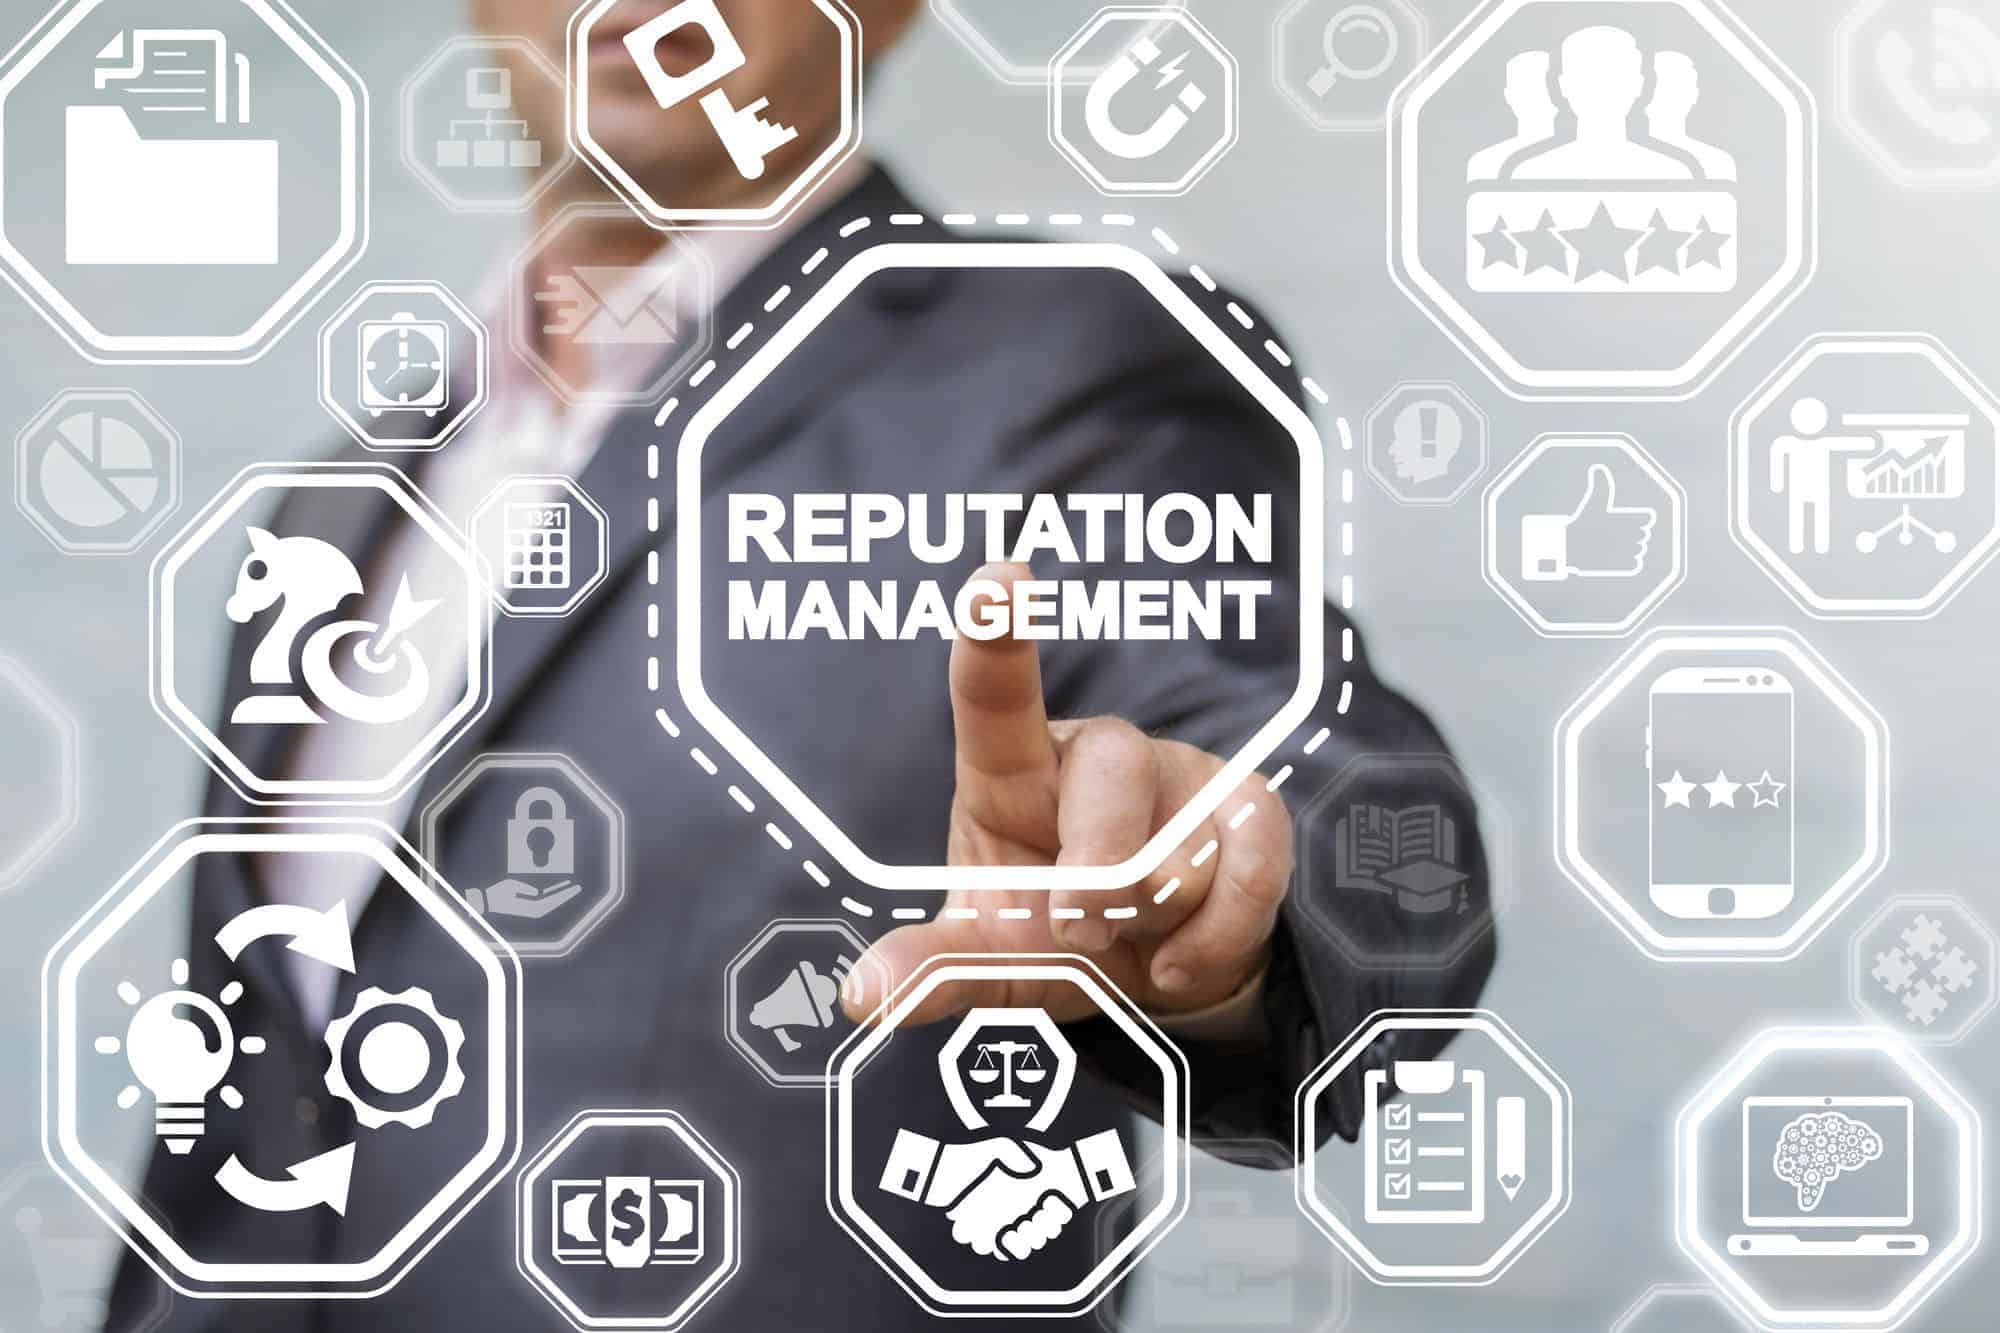 What is a reputation management strategy